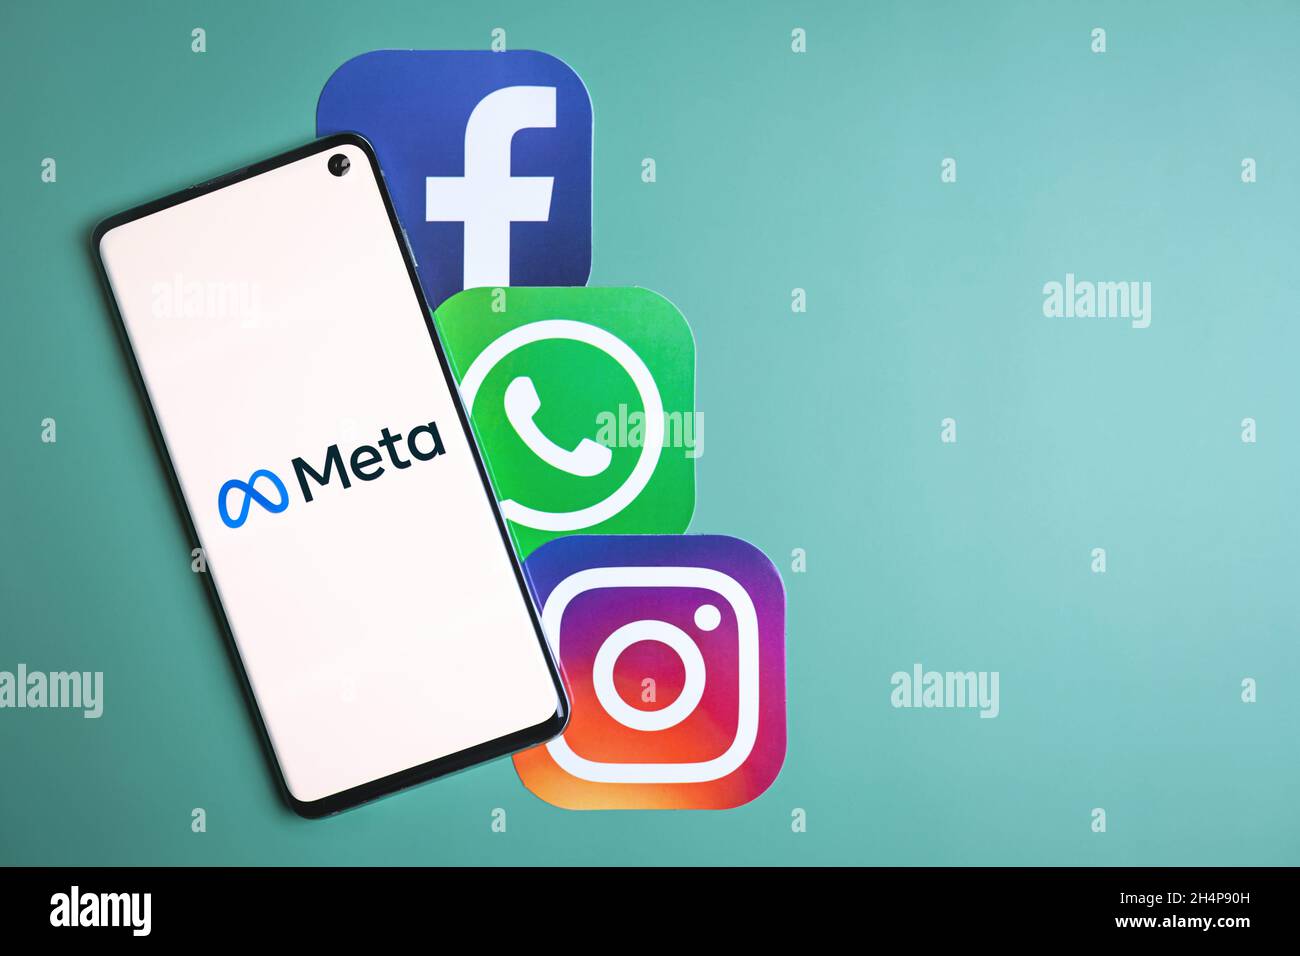 META logo on smartphone screen next to Facebook, Whatsapp and Instagram icons. Facebook changes company name to Meta and focuses on Metaverse in its rebrand. Swansea, UK - November 2, 2021. Stock Photo